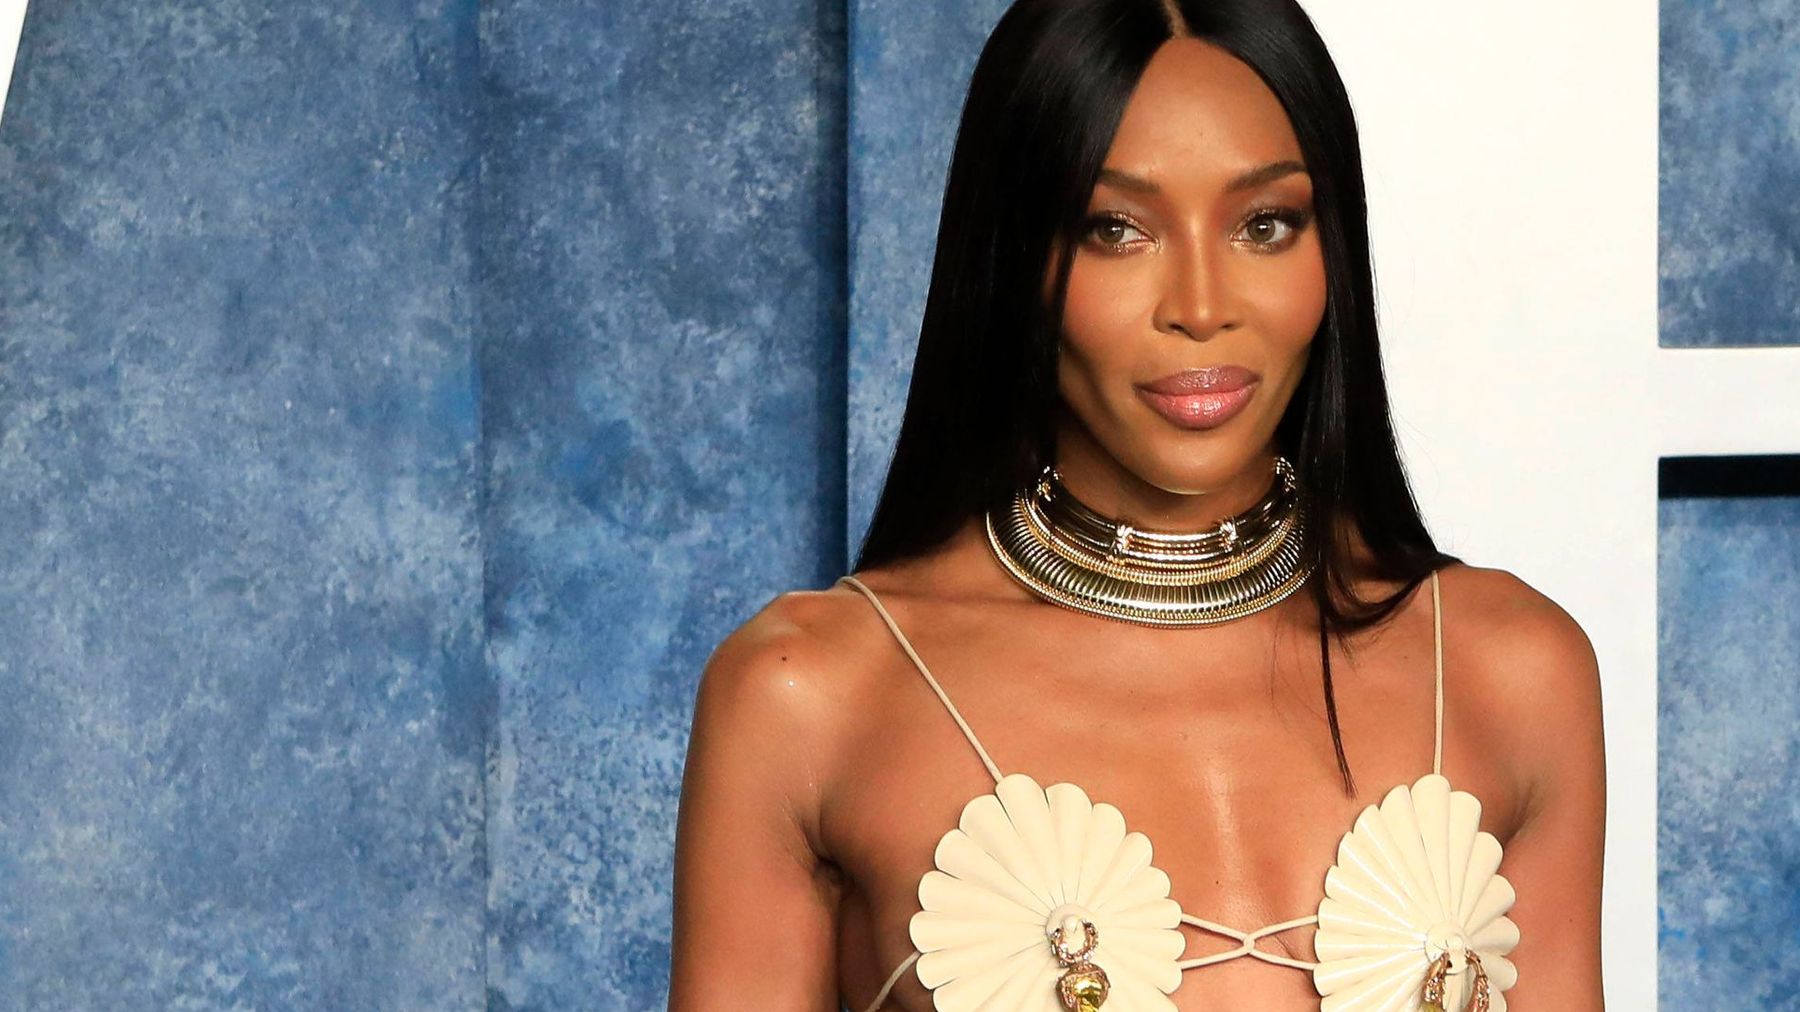 "Worst Photoshop picture": Fans criticize Naomi Campbell – this is what the original photo looks like